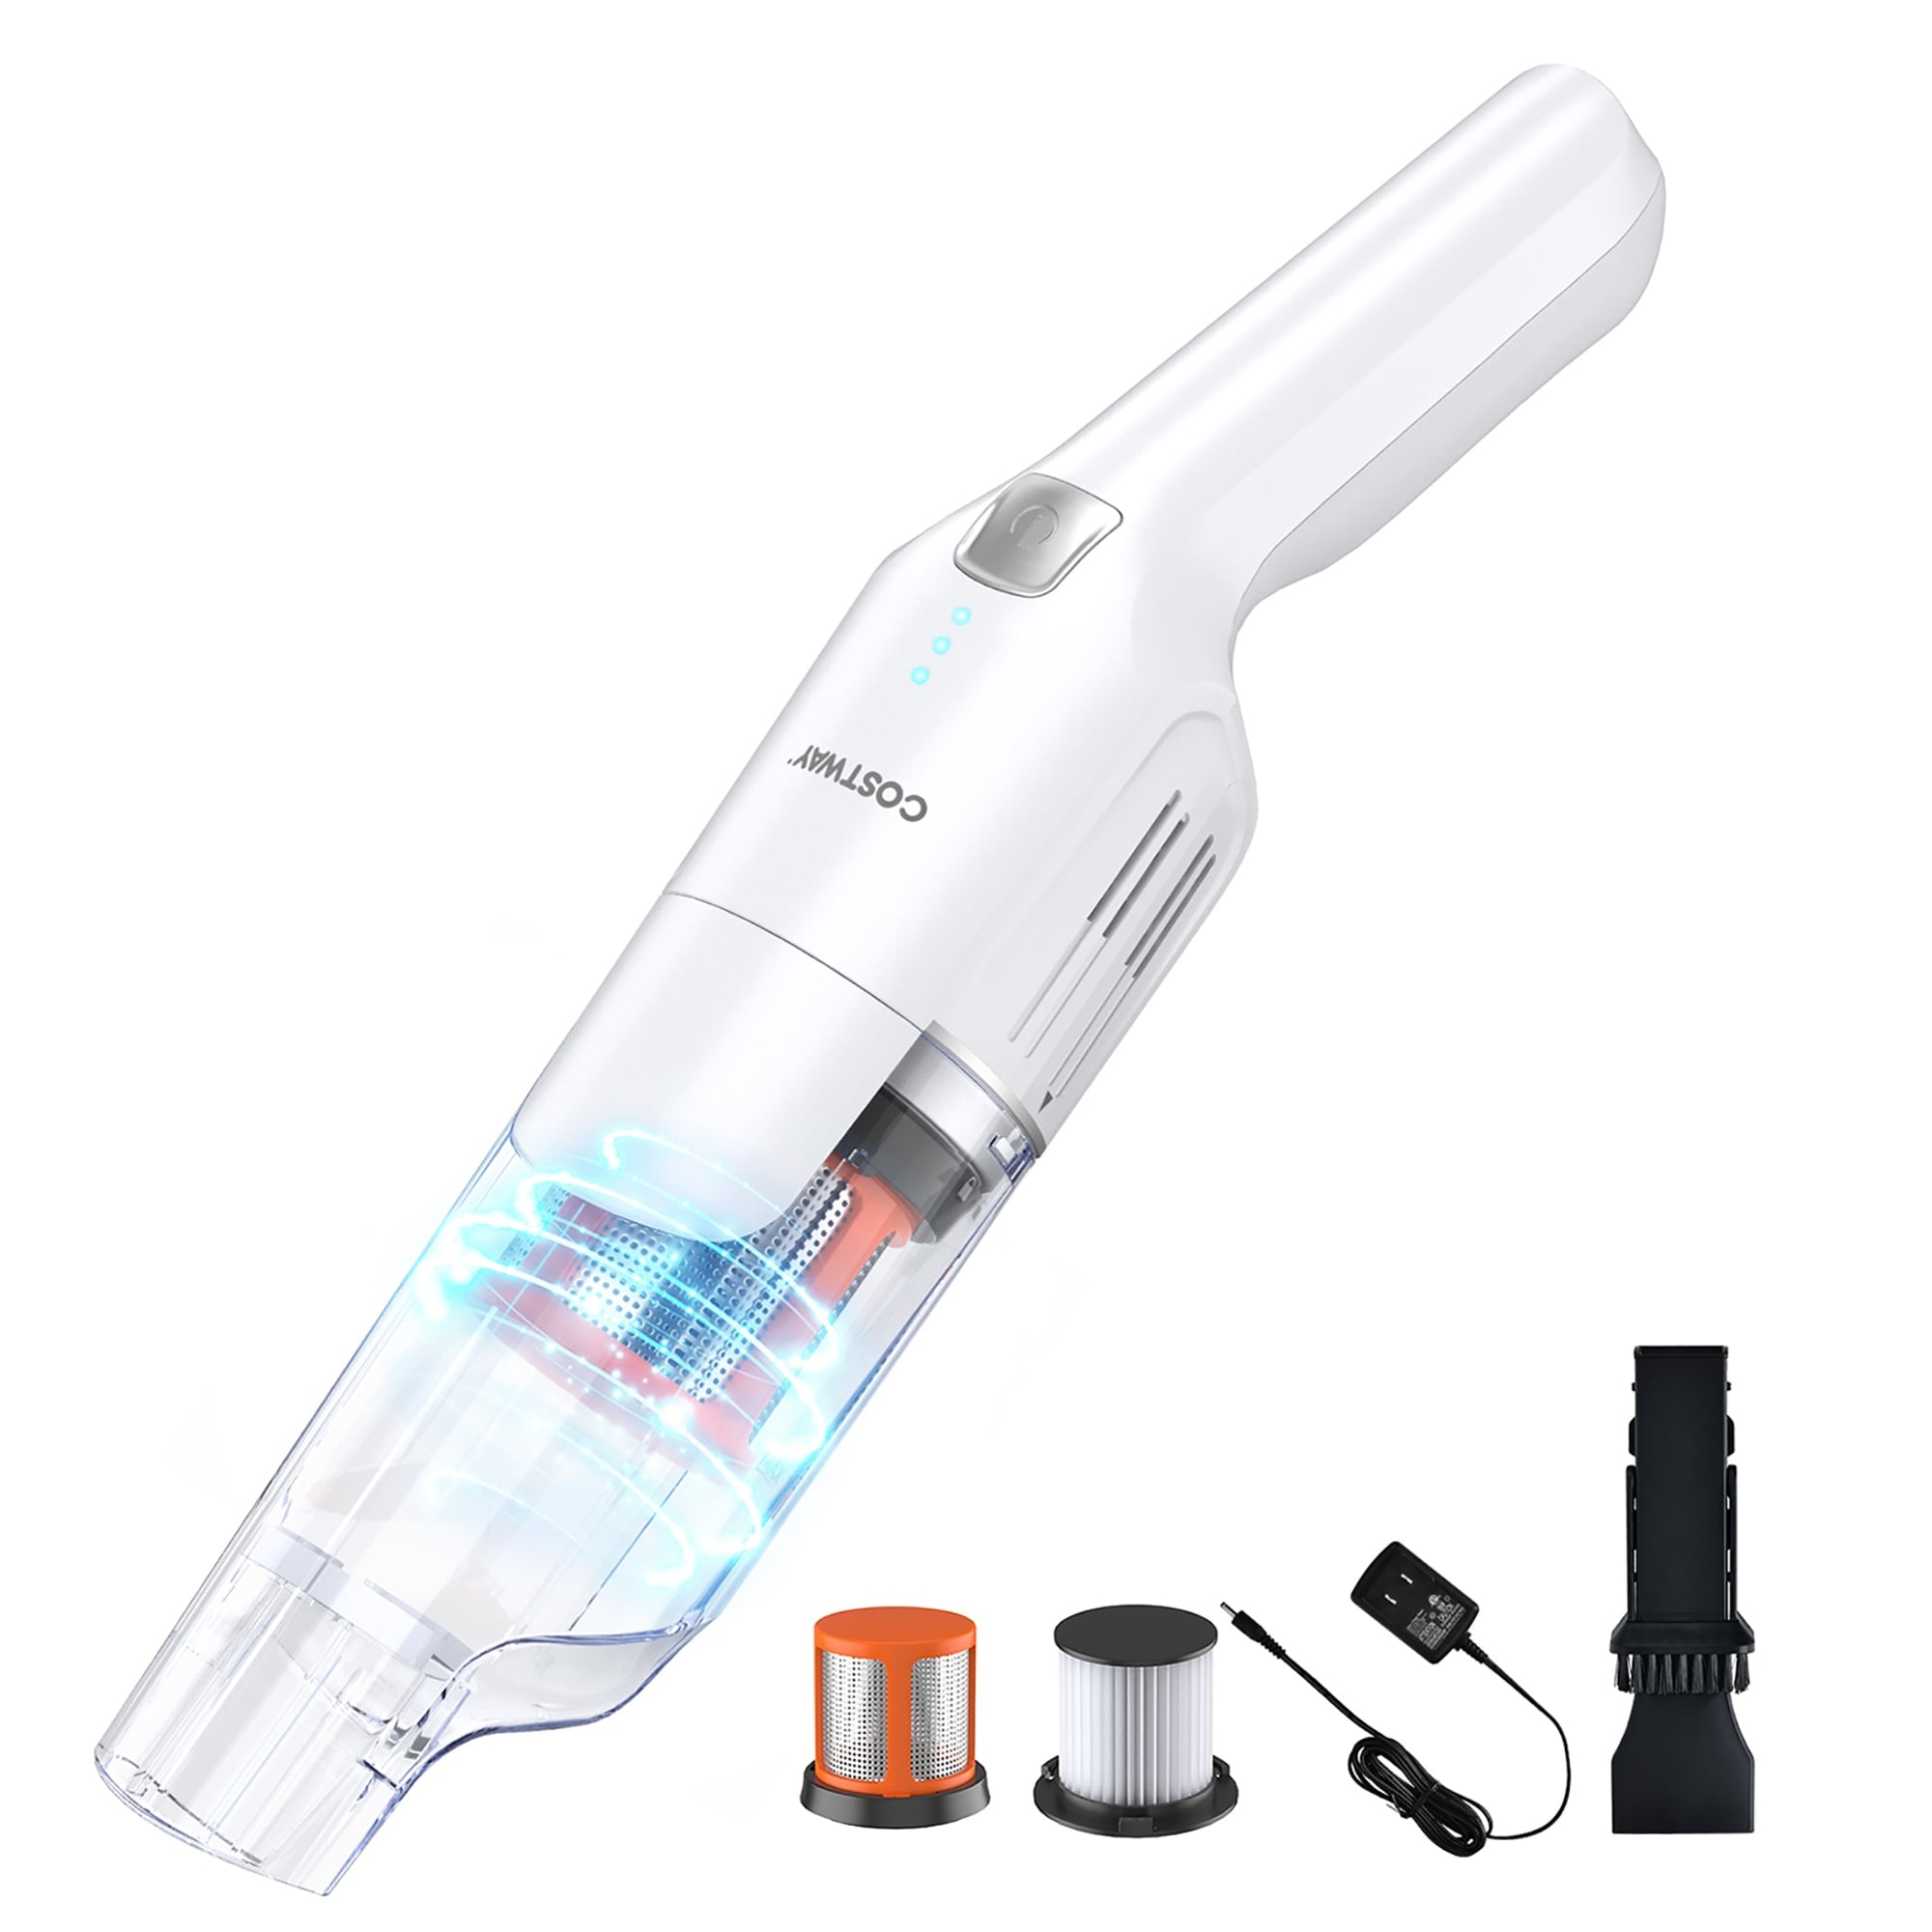 https://ak1.ostkcdn.com/images/products/is/images/direct/a94139fdb60db30a6686f3d499b27b07fc28df76/Costway-Lightweight-Handheld-Vacuum-Cleaner-Cordless-Battery-Powered.jpg